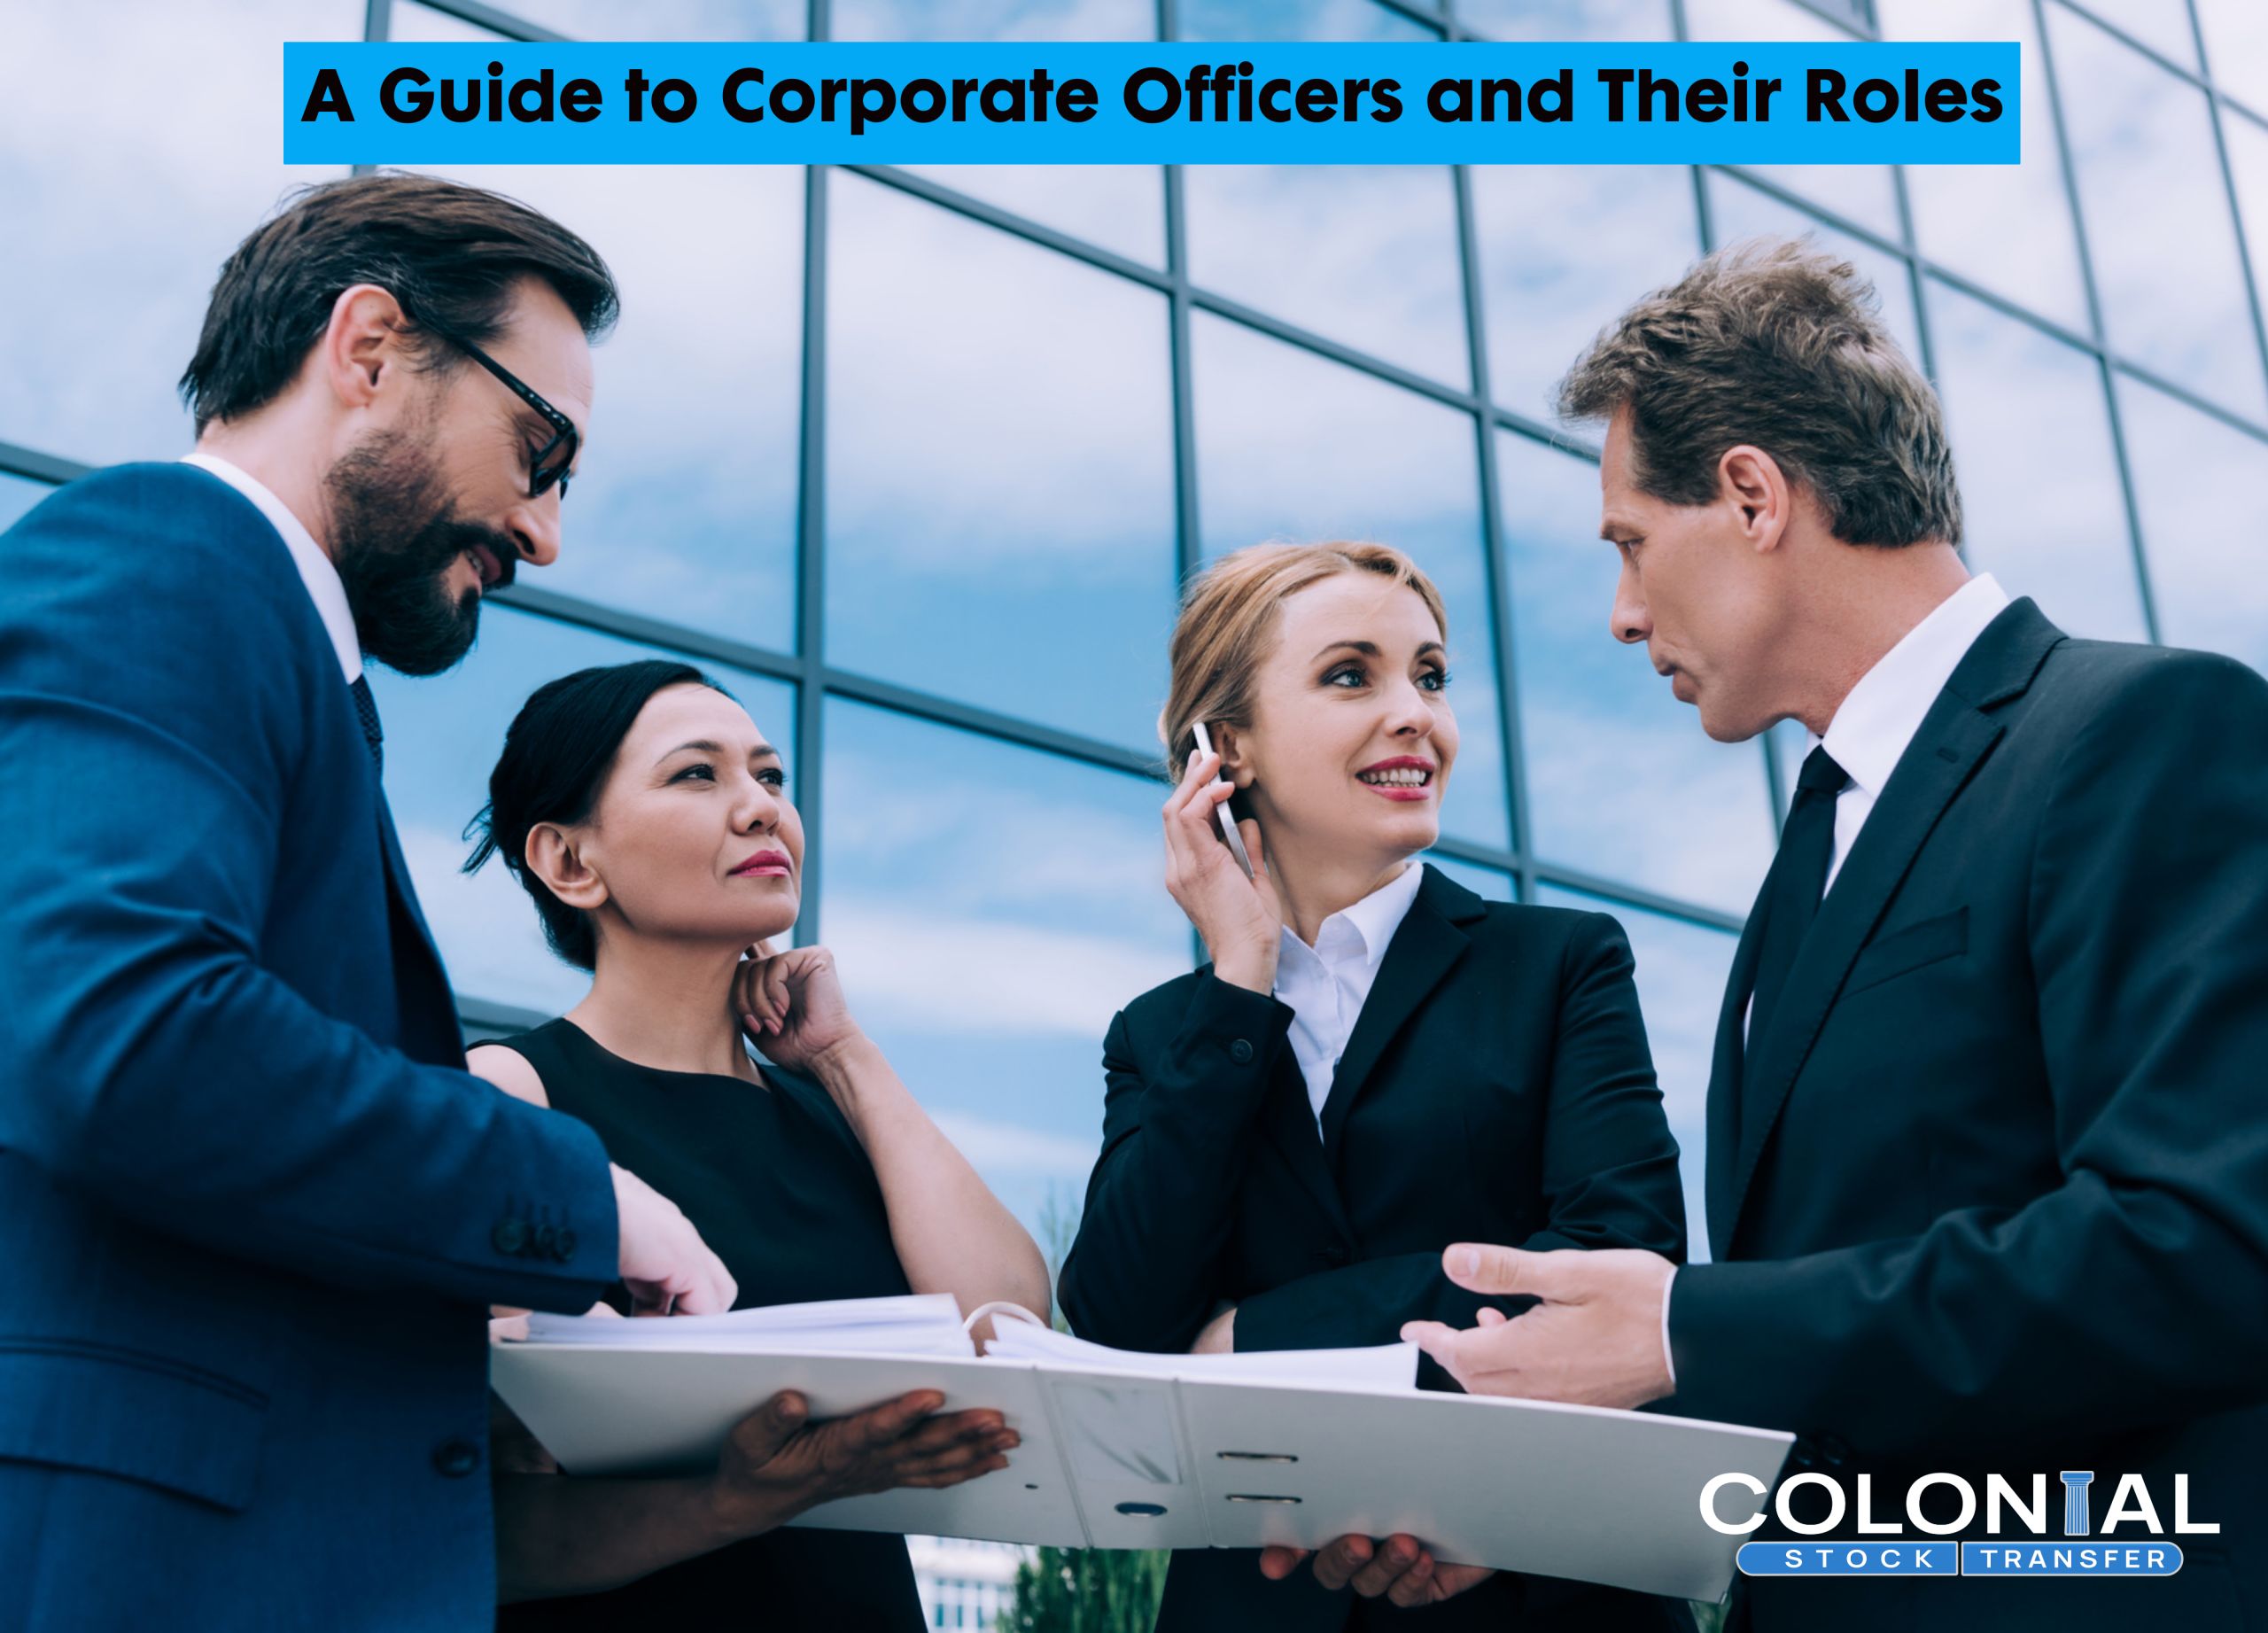 A Guide to Corporate Officers and Their Roles